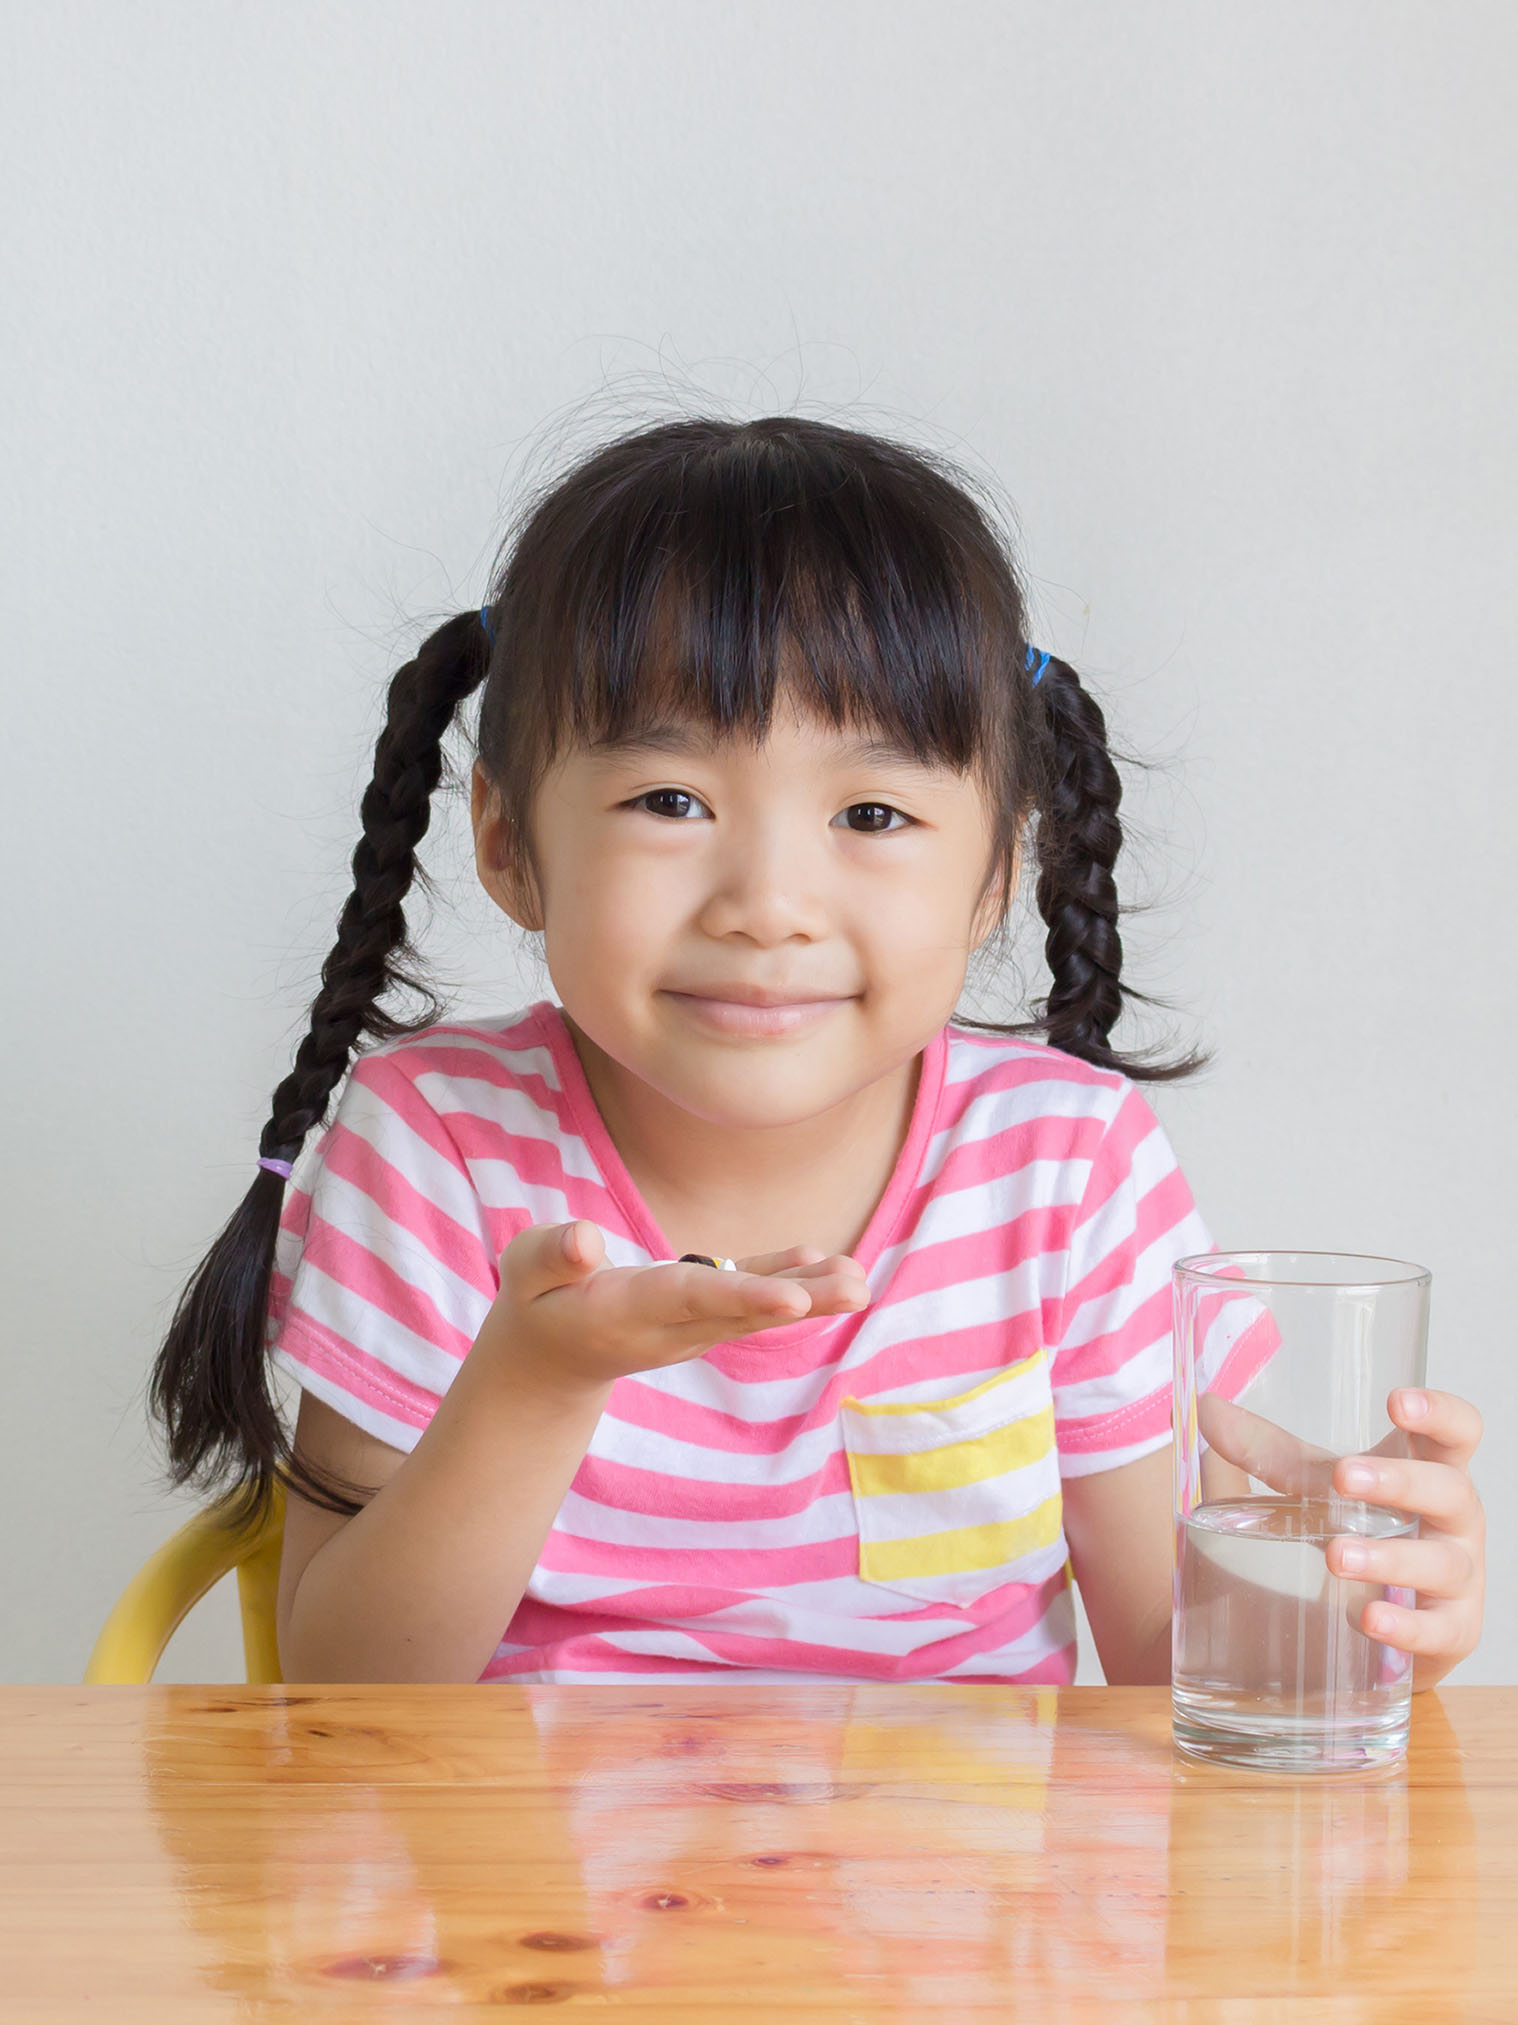 Little girl smiles while holding medication with a glass of water besides her.